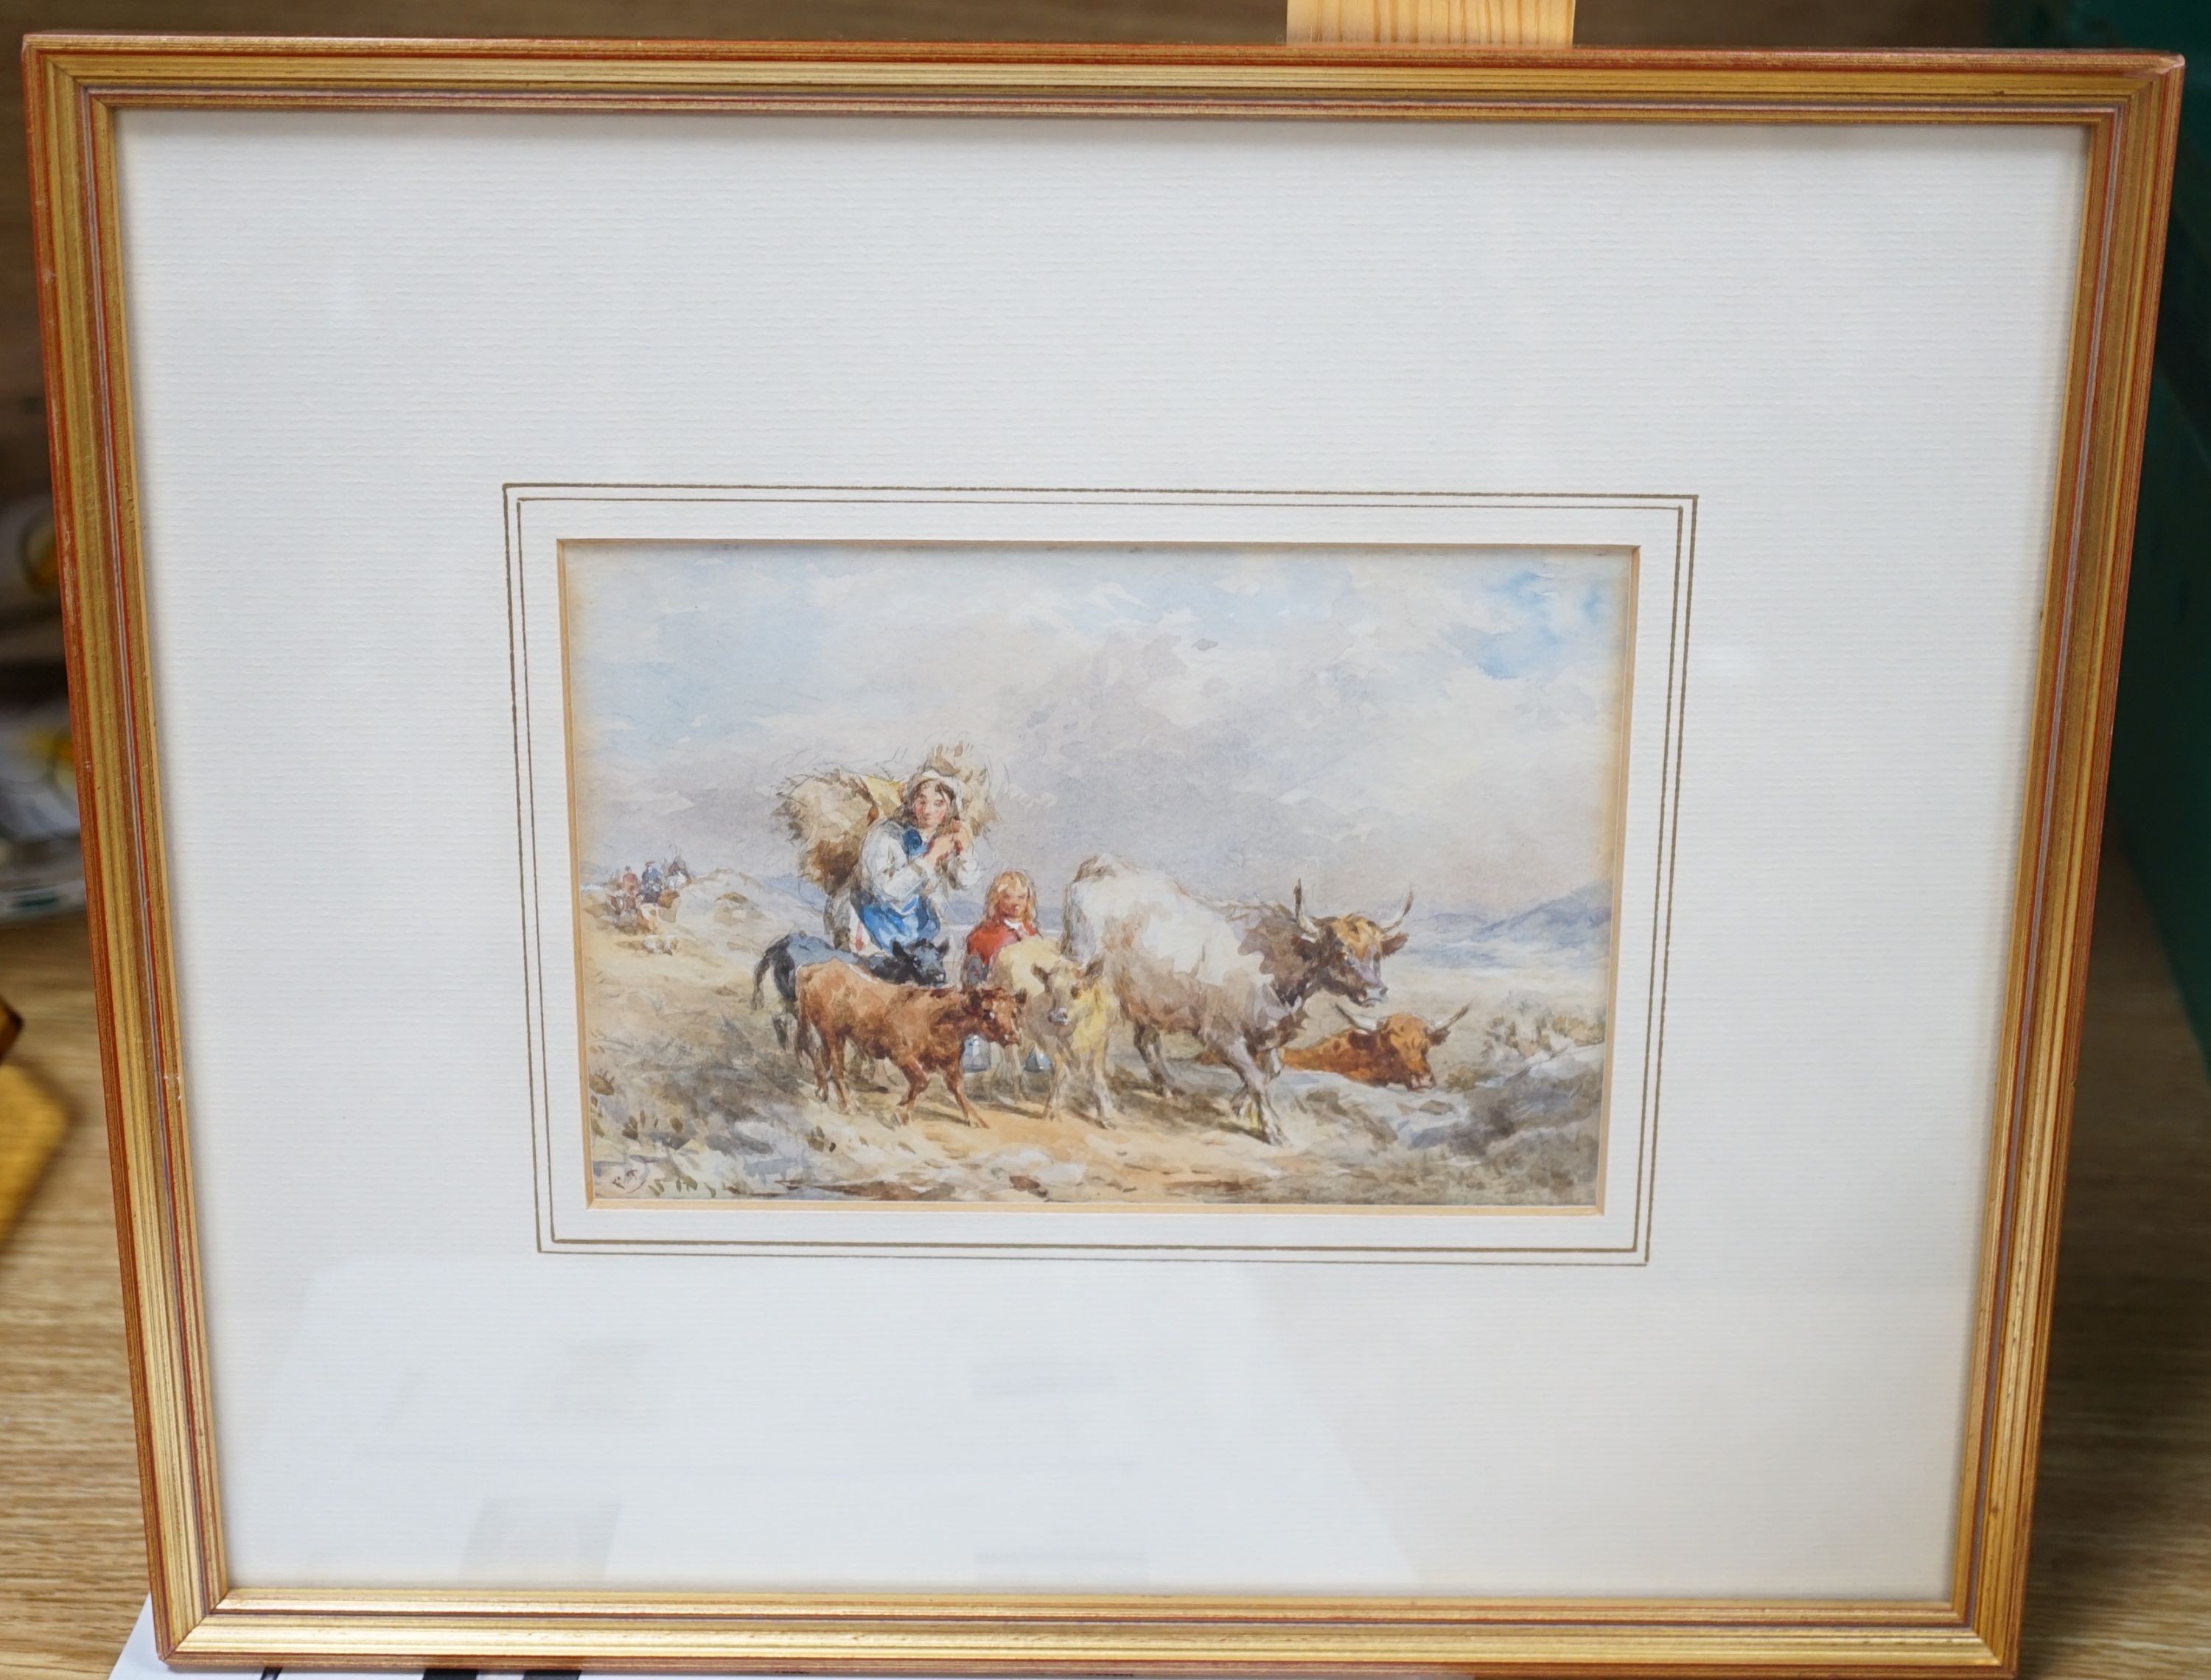 John Frederick Taylor (1802-1889), Milkmaid with cows on a country road, watercolour, signed - Image 3 of 3